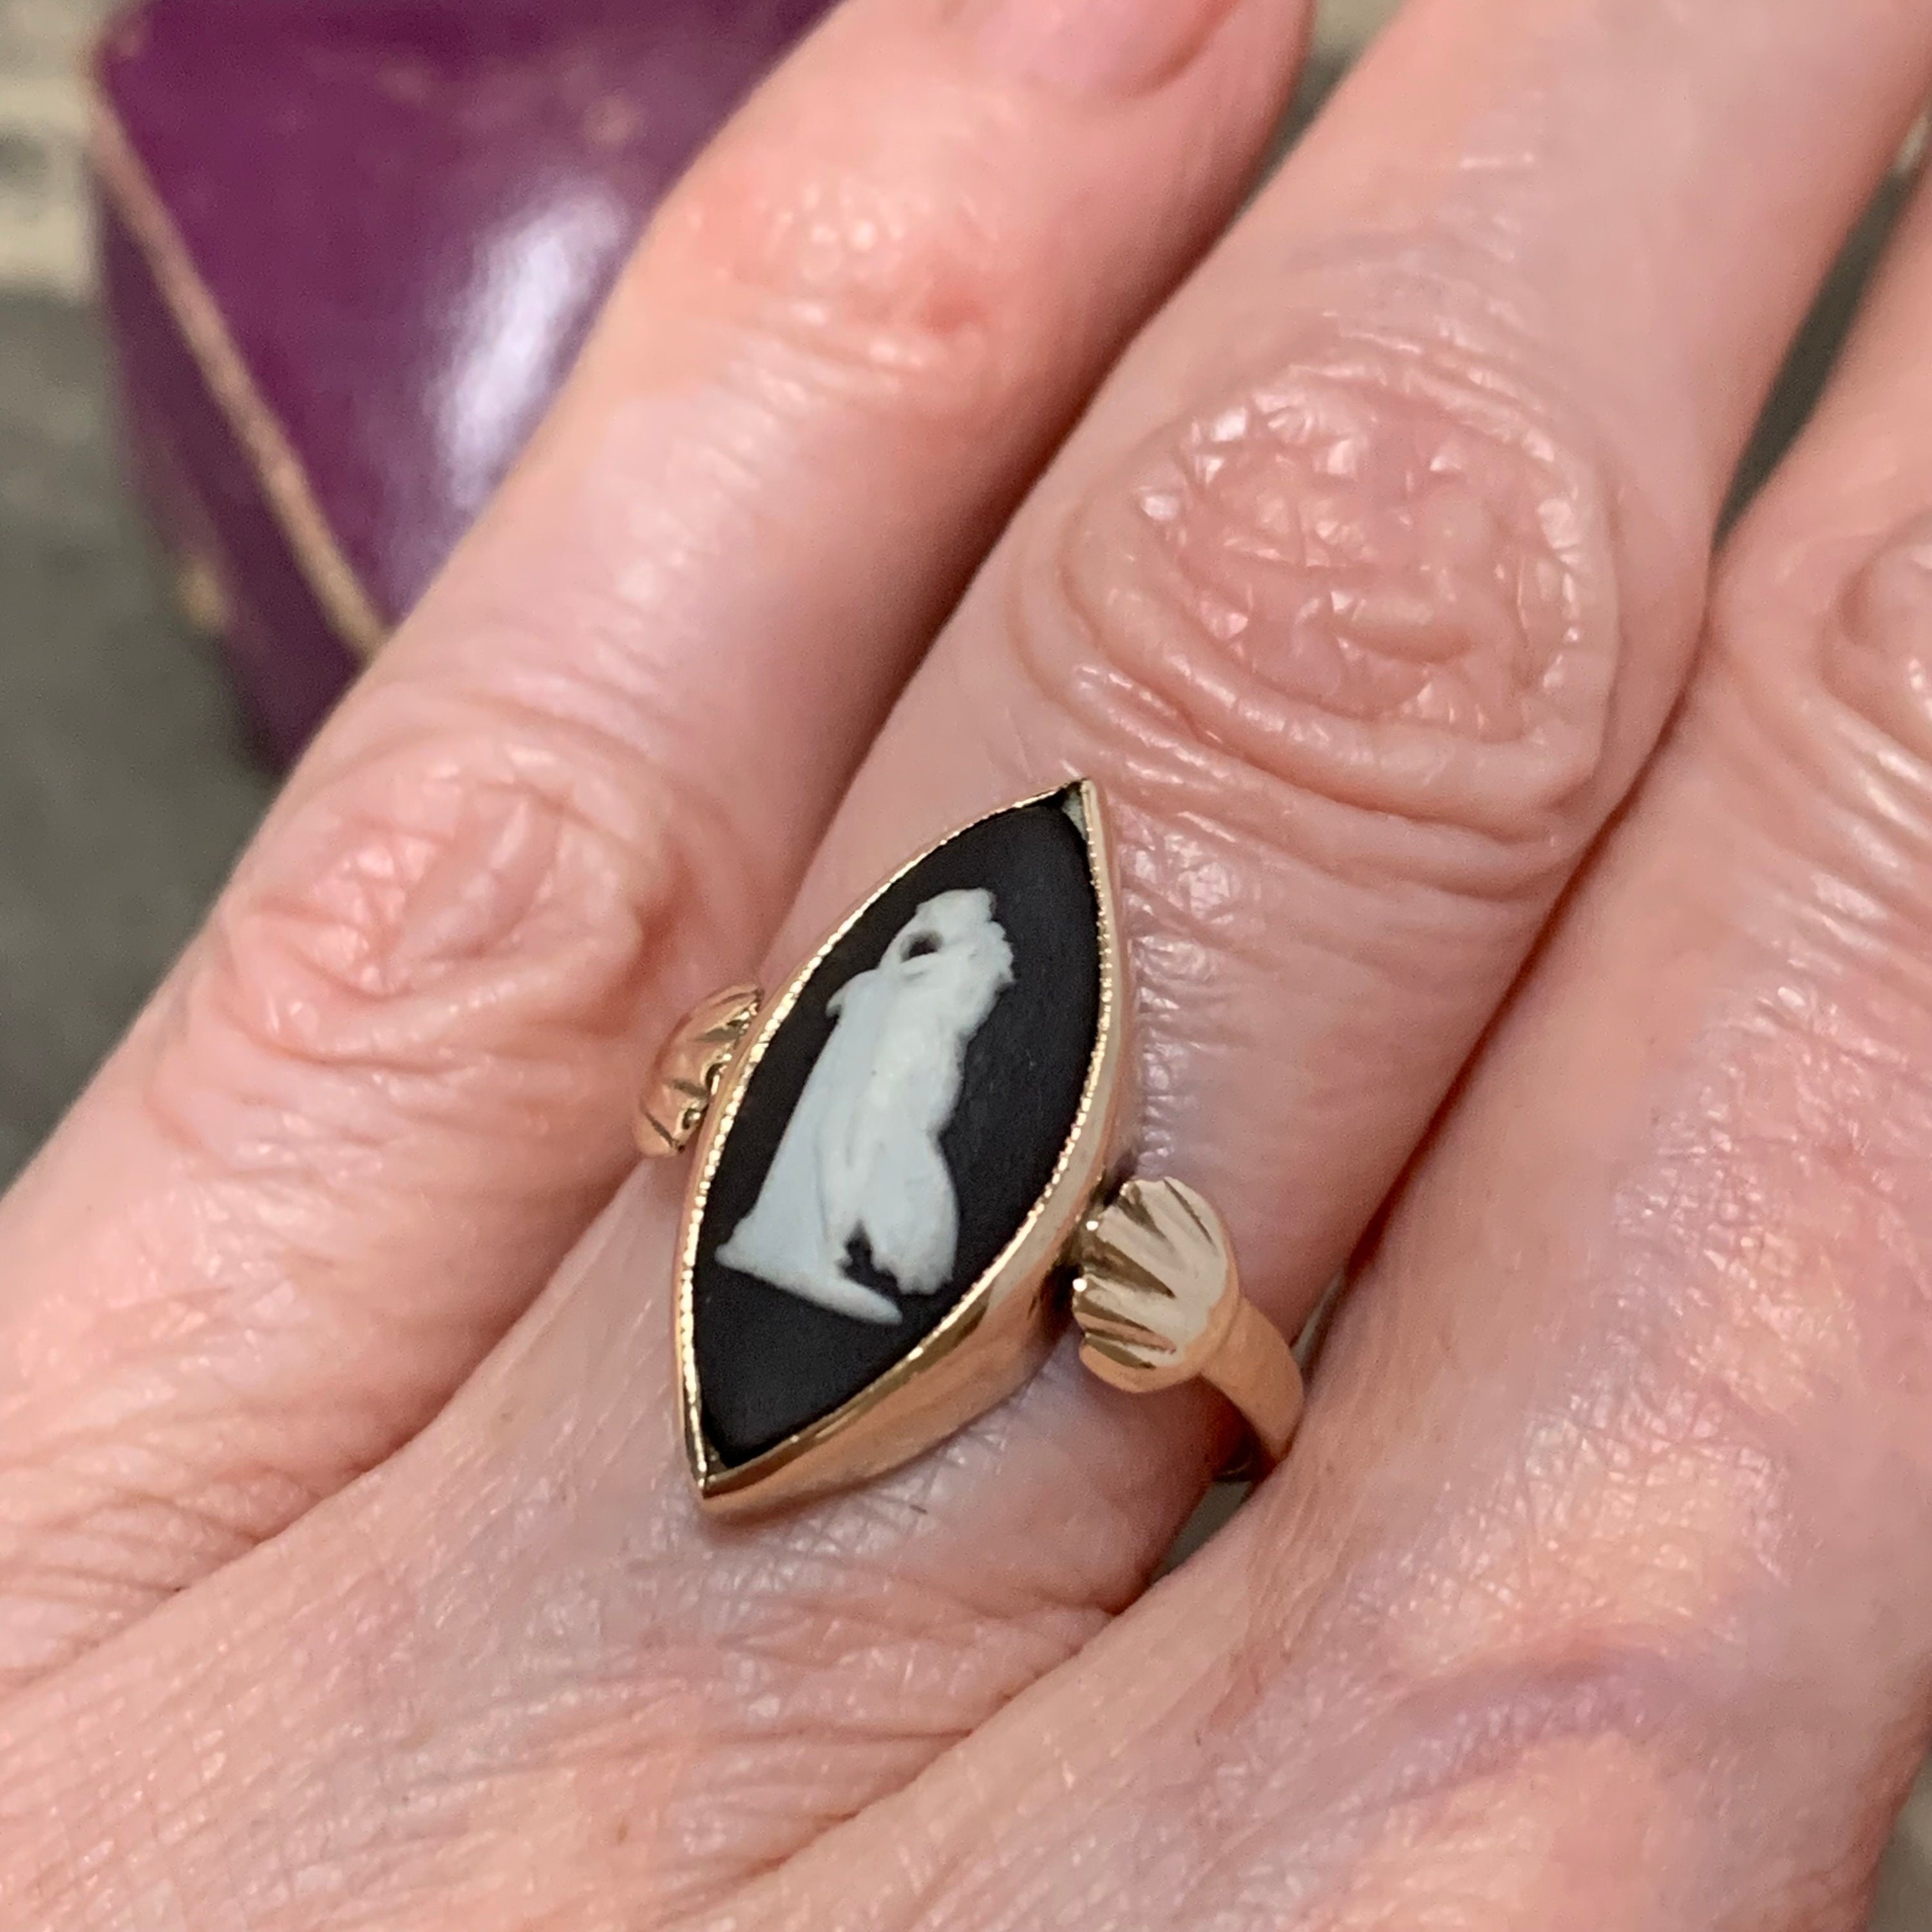 Art Deco Cameo Ring Made By Wedgwood in Black Jasperware. Bezel Set 9Ct Gold Featuring A Image Of Greek Goddess